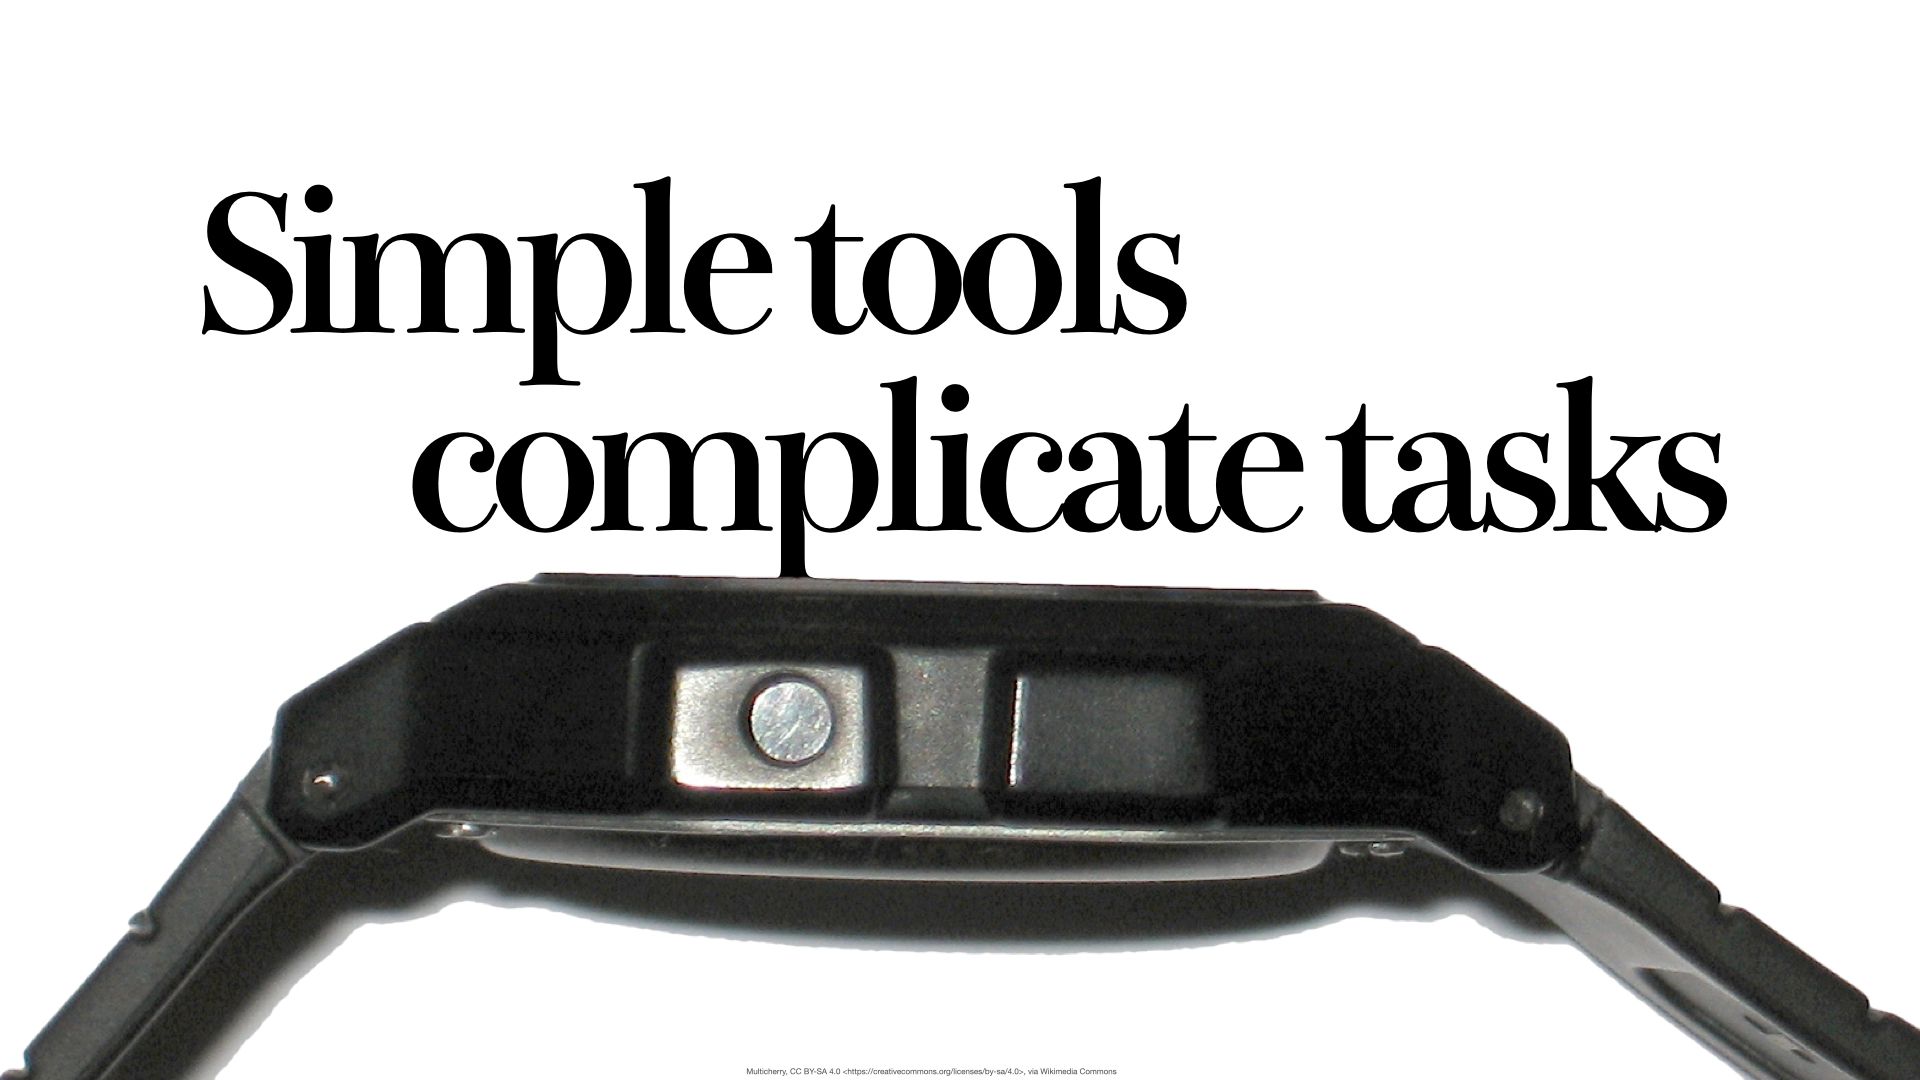 Slide text "Simple tools complicate tasks" above an old digital watch viewed from the side, one control button showing